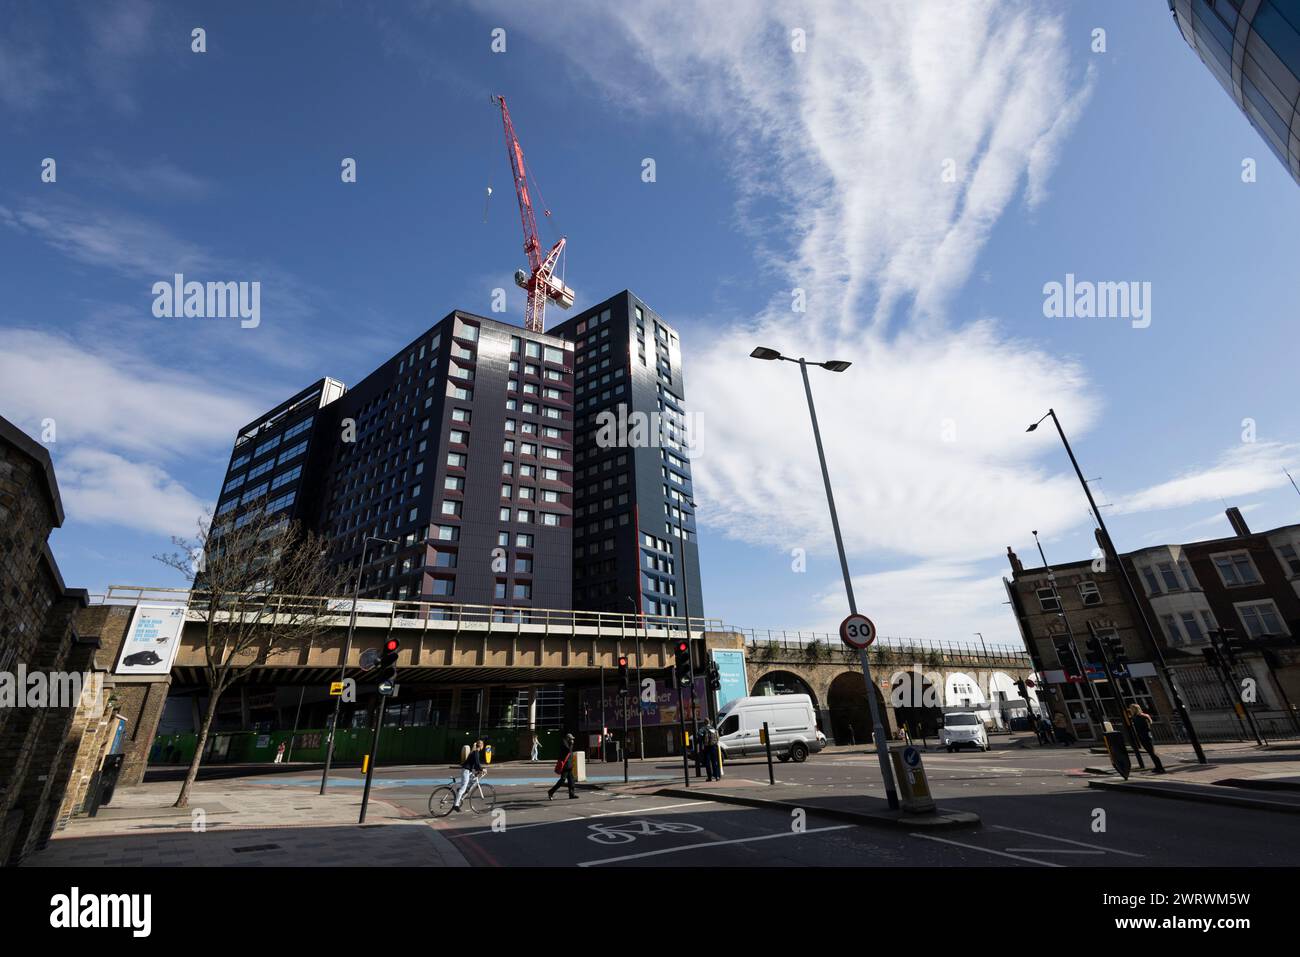 Prince of Wales Drive and Battersea Park Road area of Southwest London convenient for the Battersea Power Station retail and residential development. Stock Photo